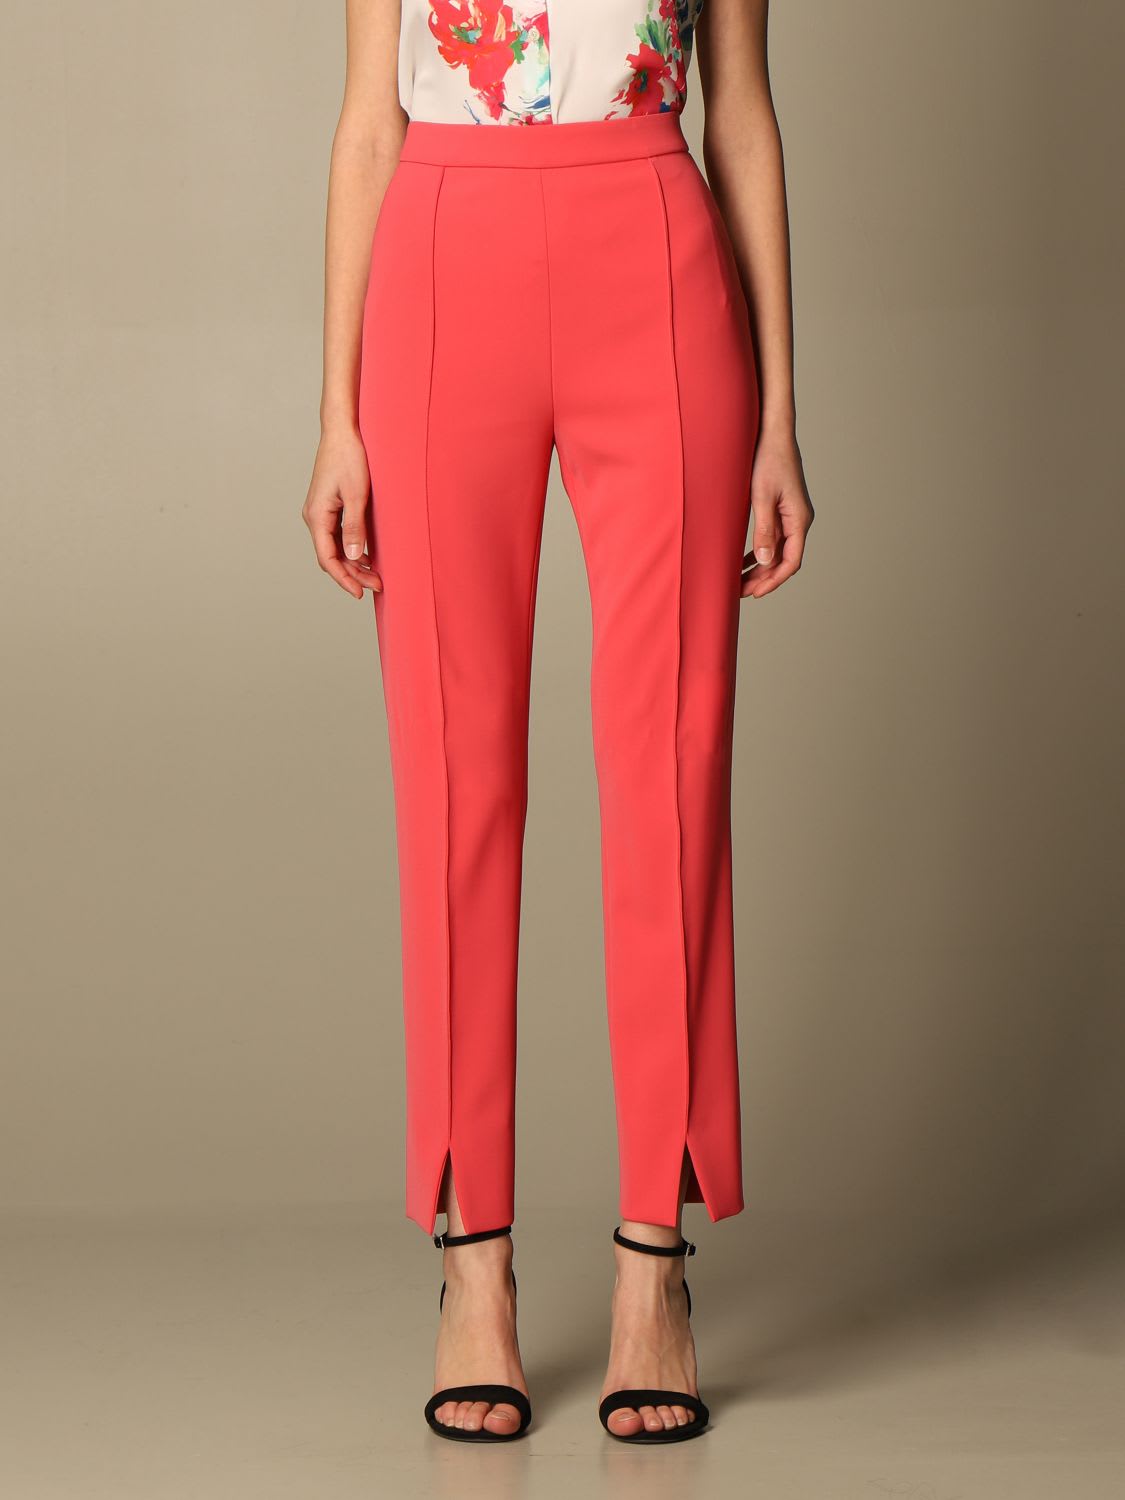 Boutique Moschino Pants Moschino Boutique Slim Cady Trousers